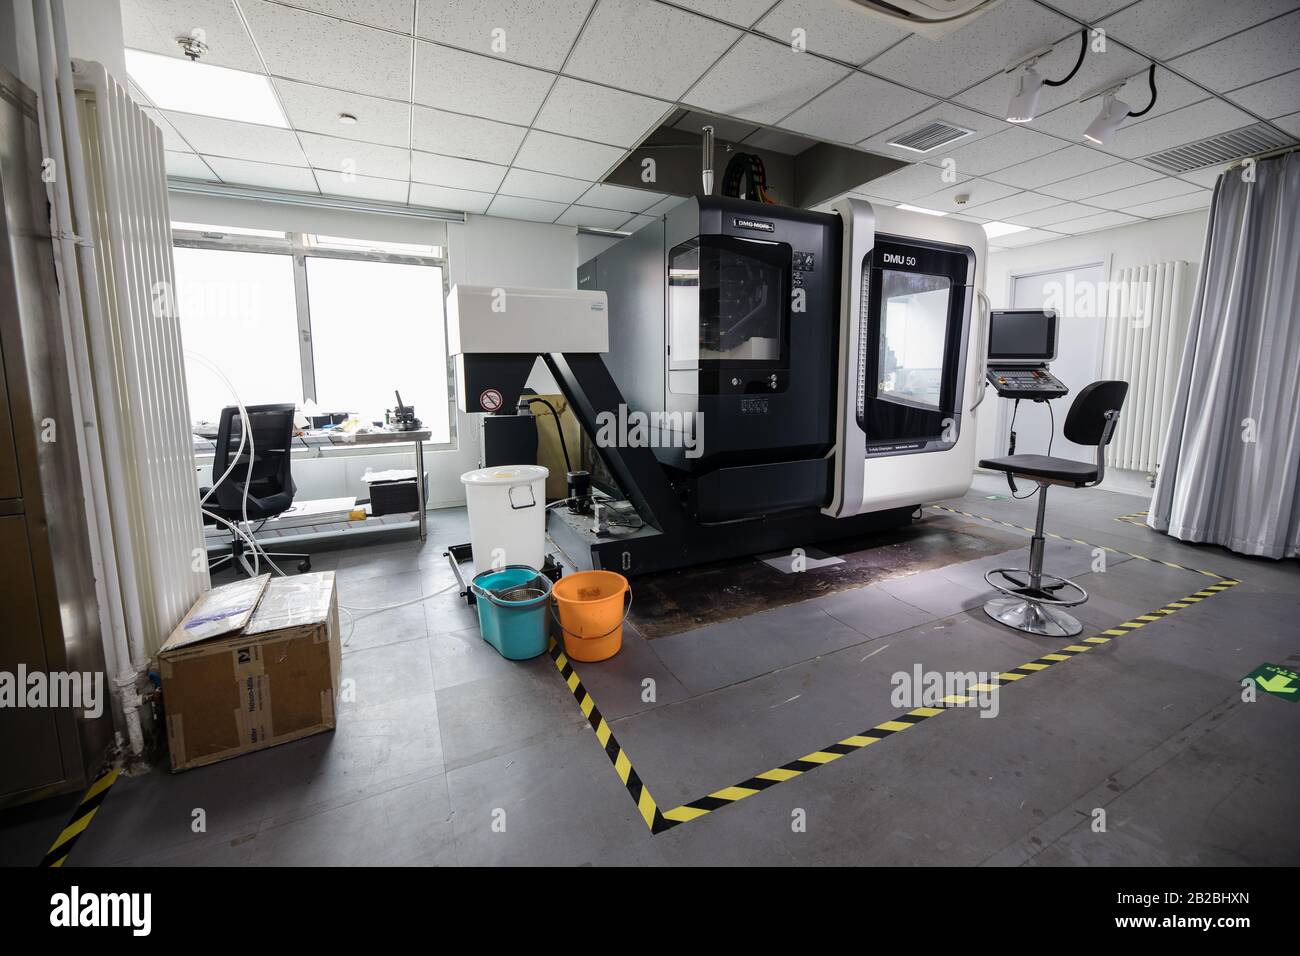 BEIJING, СHINA - JUNE 03: Laboratory for manufacture of high-tech chip elements in China. Stock Photo